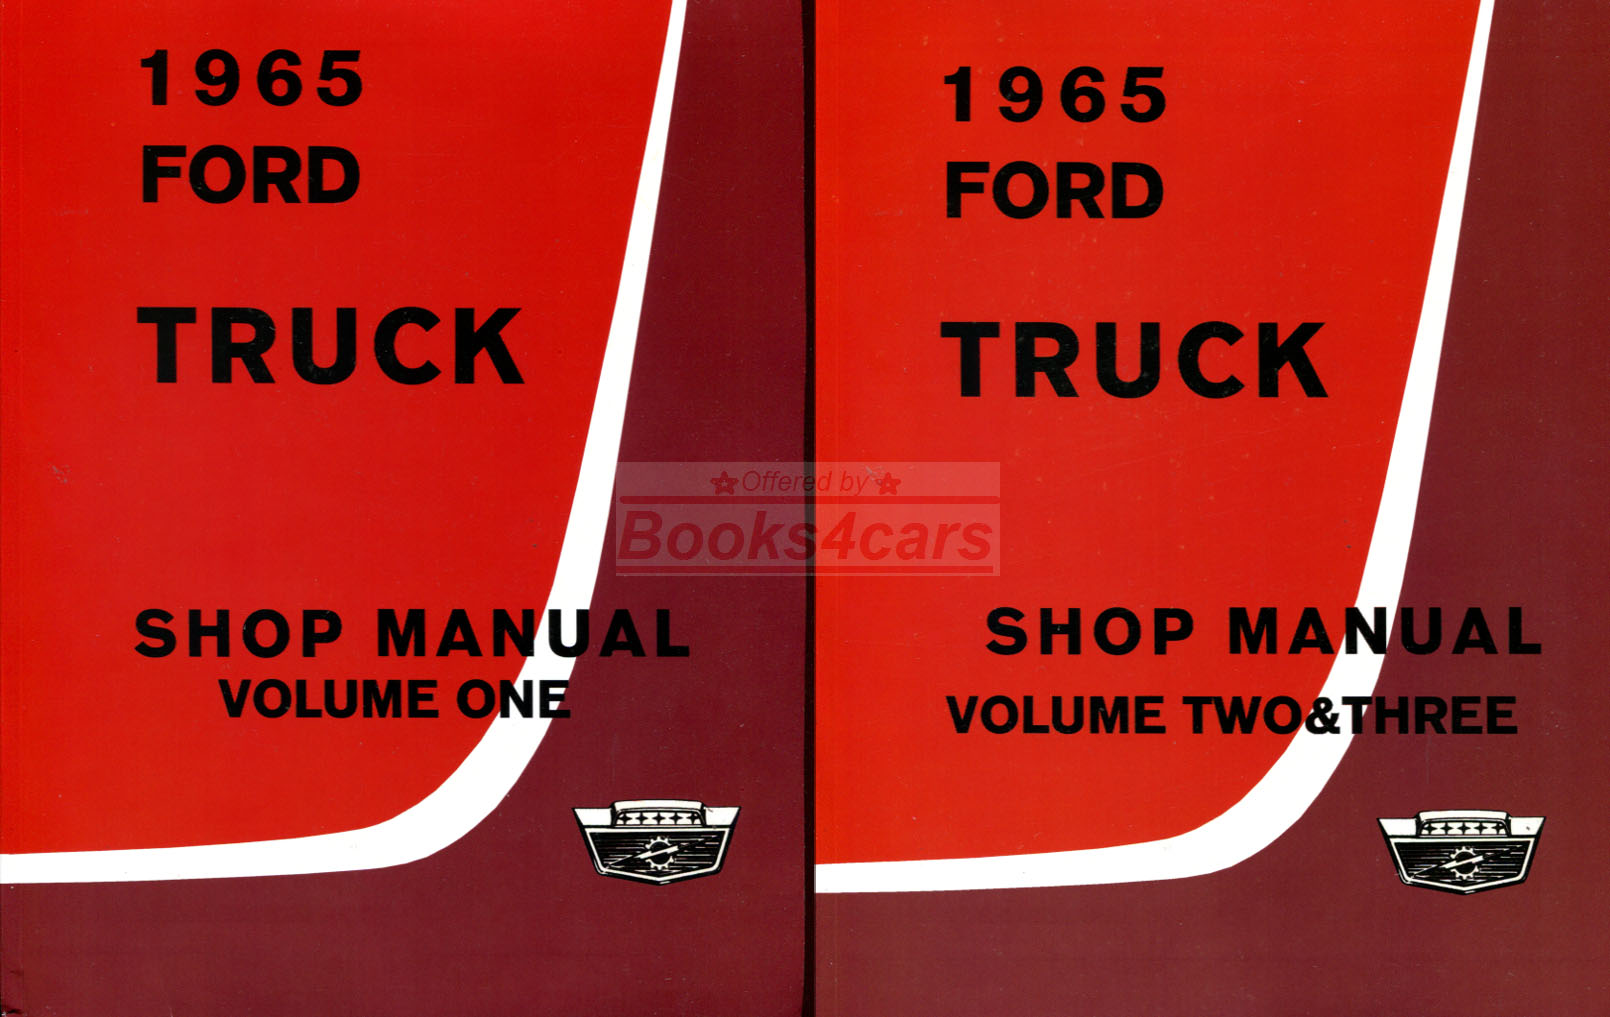 65 Truck Shop Service Repair Manual 3 volume set by Ford; 1,270+ pages including F100 F150 F250 F350 through F750